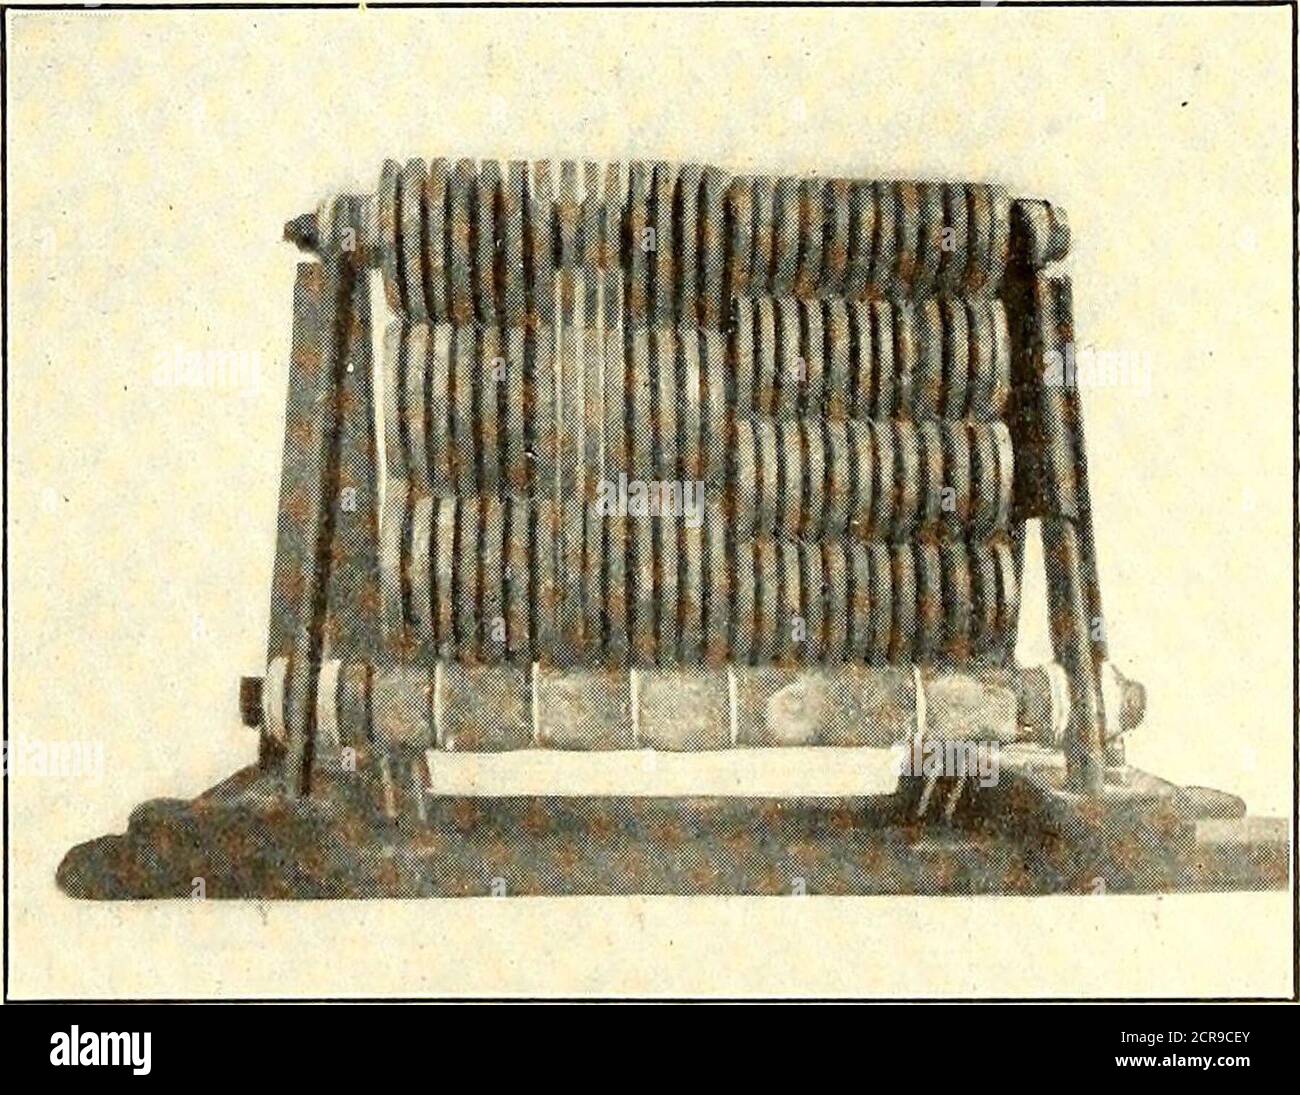 . Electric railway journal . forced open 1/16 in. and the grid is clamped to the jigwith a screw clamp, to provide for contraction in cooling.After the weld has been made and the cast iron hascooled to a dull red heat the clamp is removed to preventbreakage by contraction. An accompanying illustration shows two jigs withgrids mounted on them; that on the left side having thegrid lined up ready for welding, with the carbon moldand the screw clamp in place. The crack has been Vdout to permit puddling at the bottom and to save time.The jig on the right side contains a grid with the crackwelded. T Stock Photo